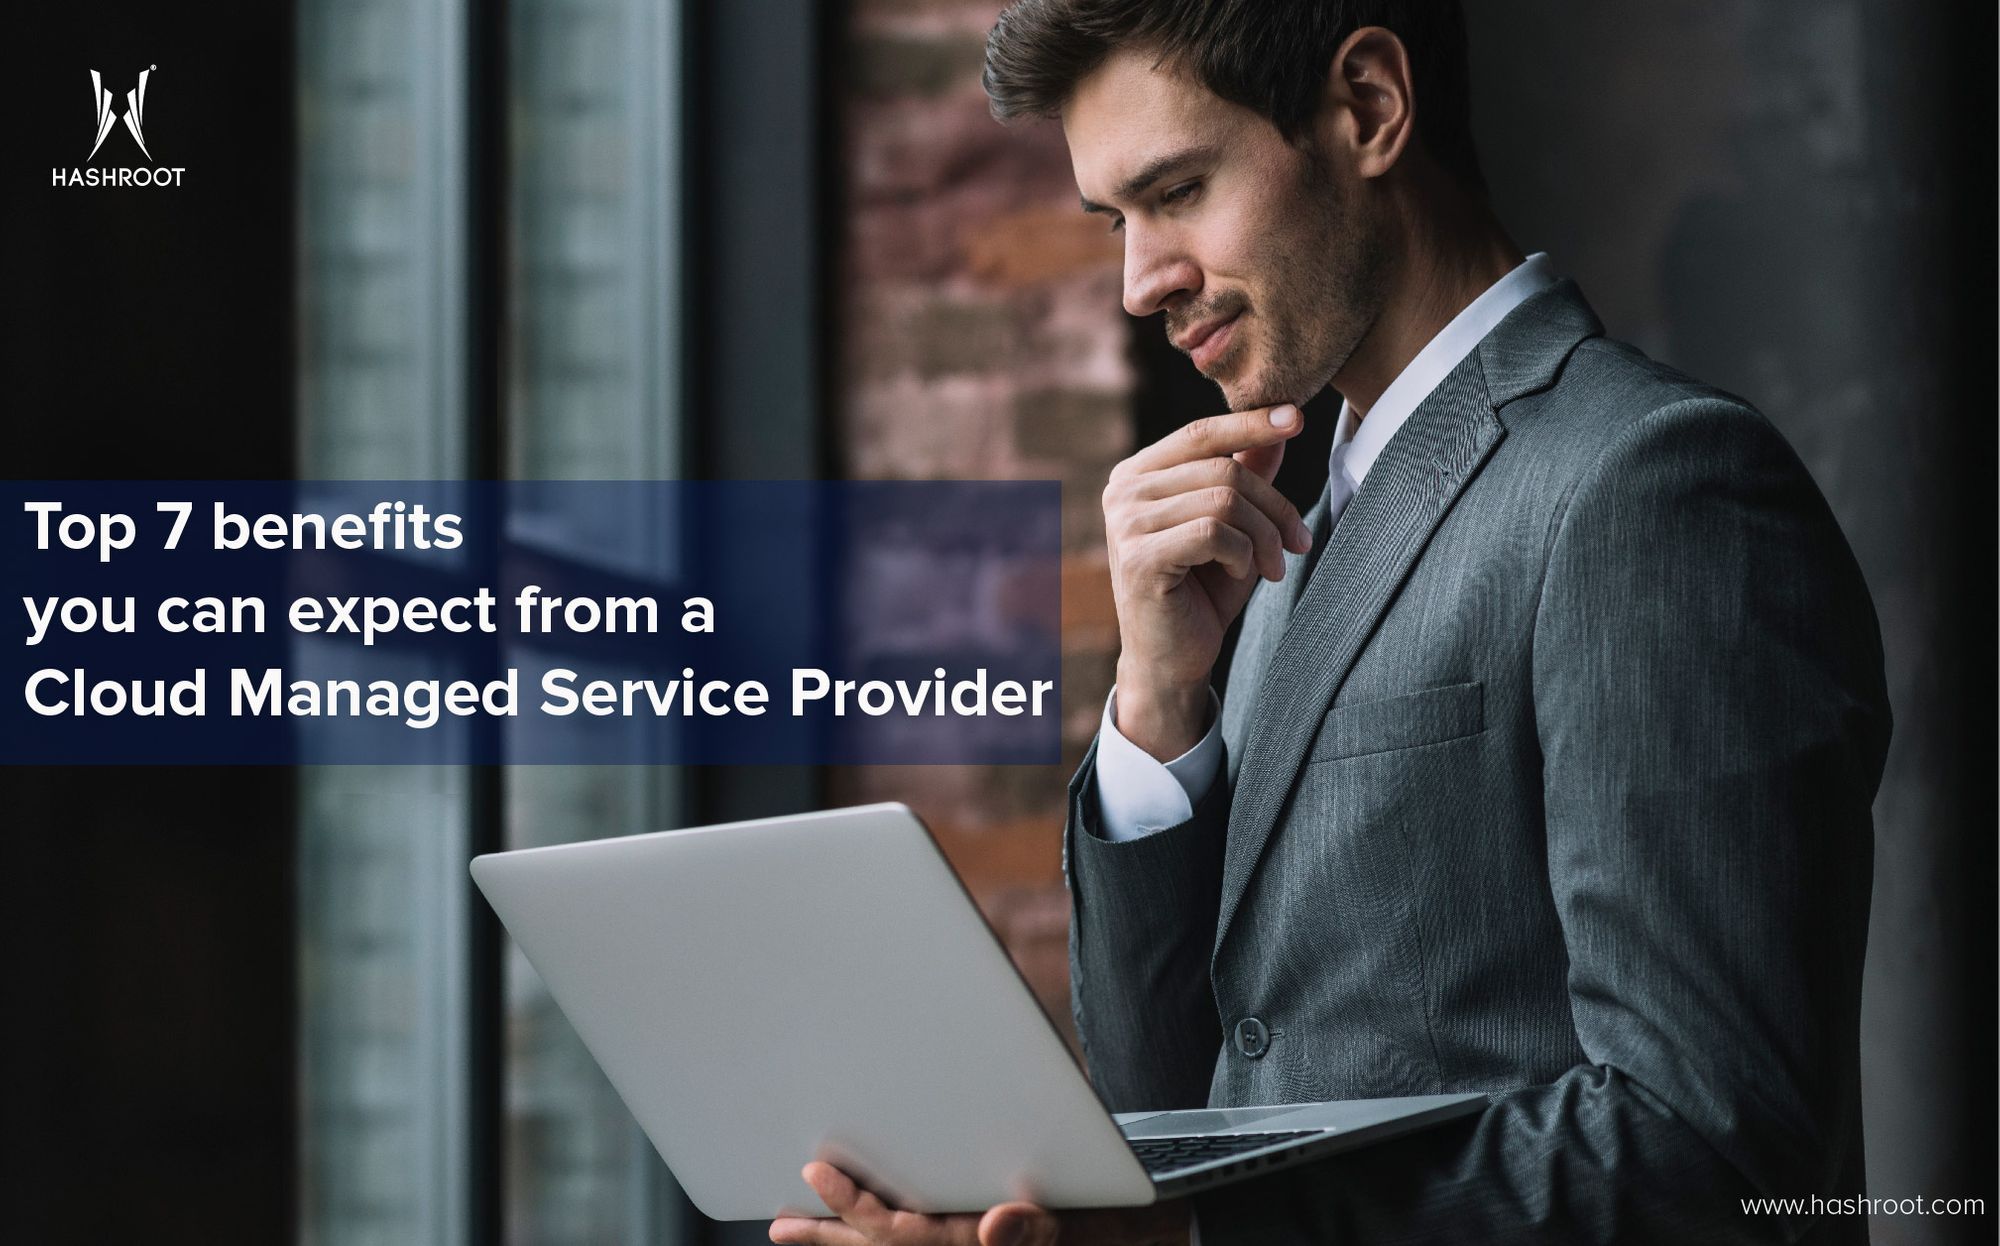 Top 7 benefits your business could derive from a Cloud Managed Service Provider